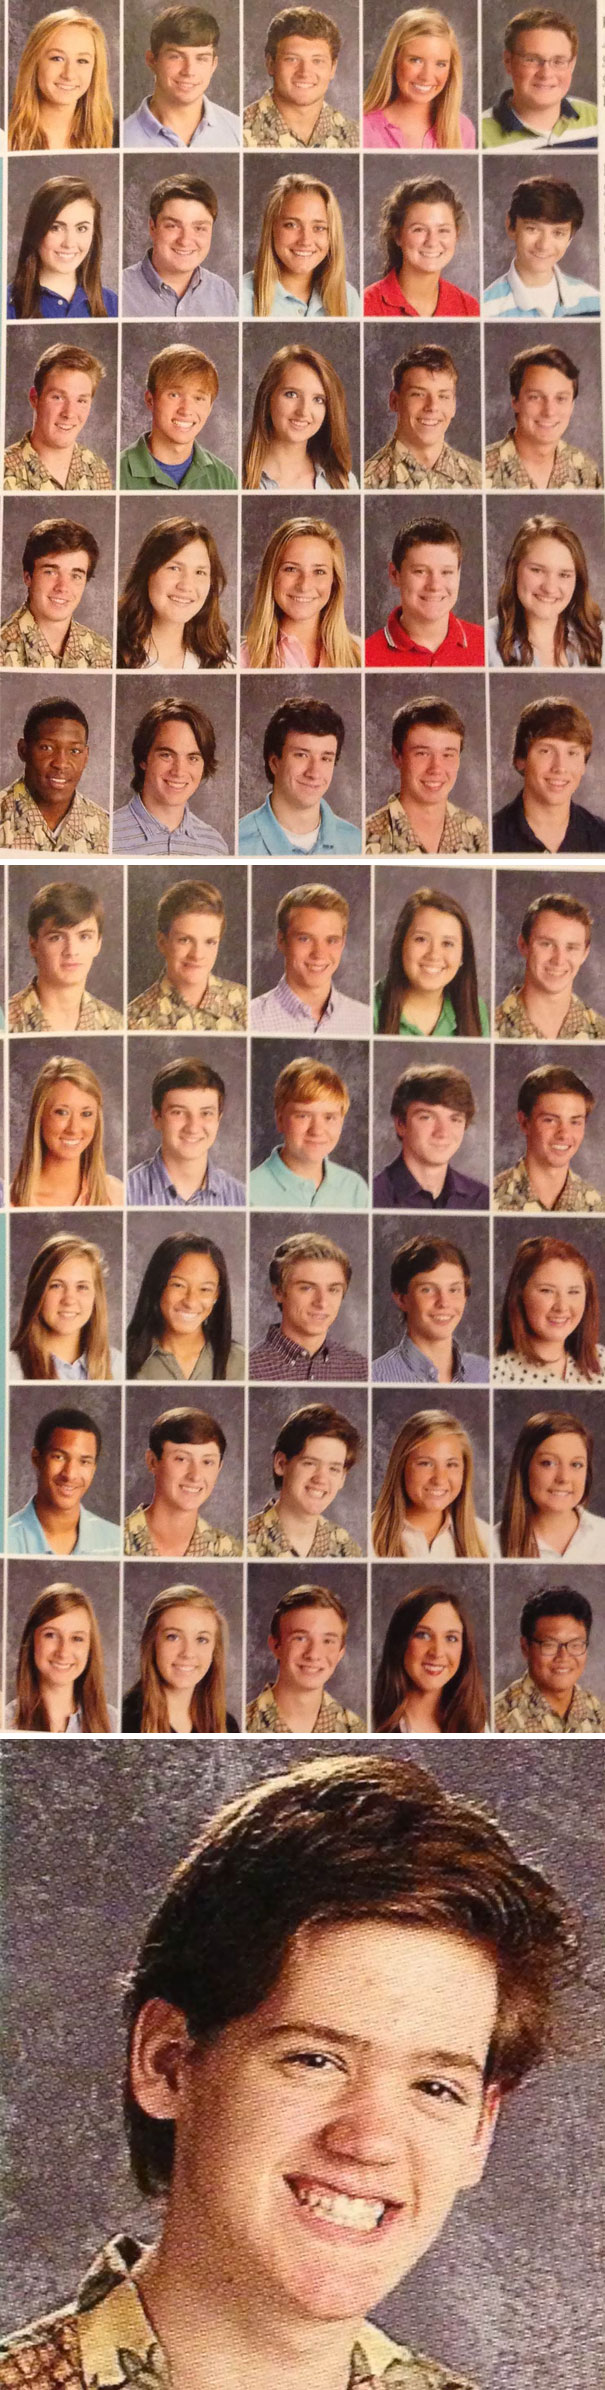 Some Guys At My School Thought It Would Be Funny To Pass Around A Pineapple Shirt On Picture Day